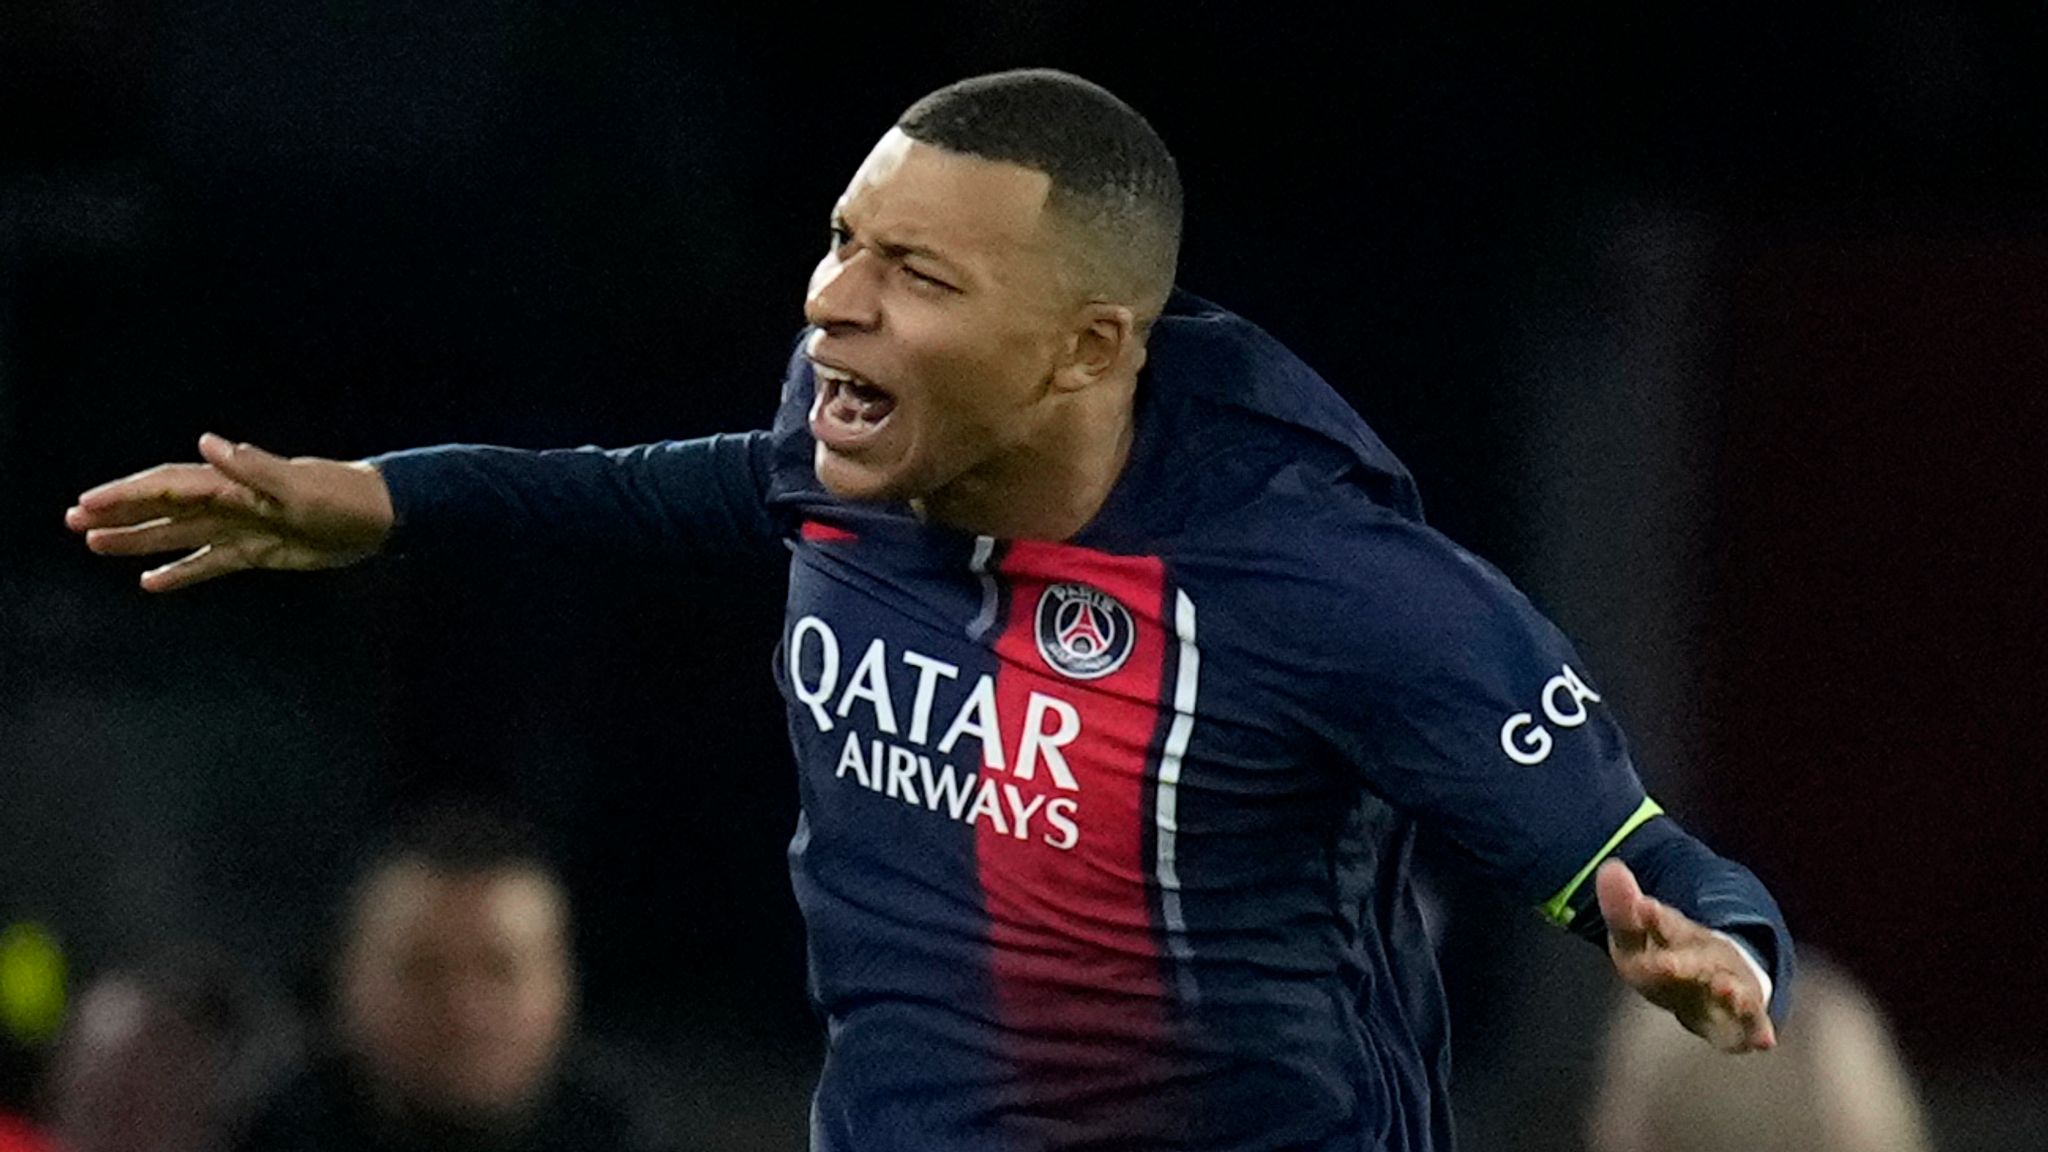 Mbappe returns for PSG as substitute against Toulouse